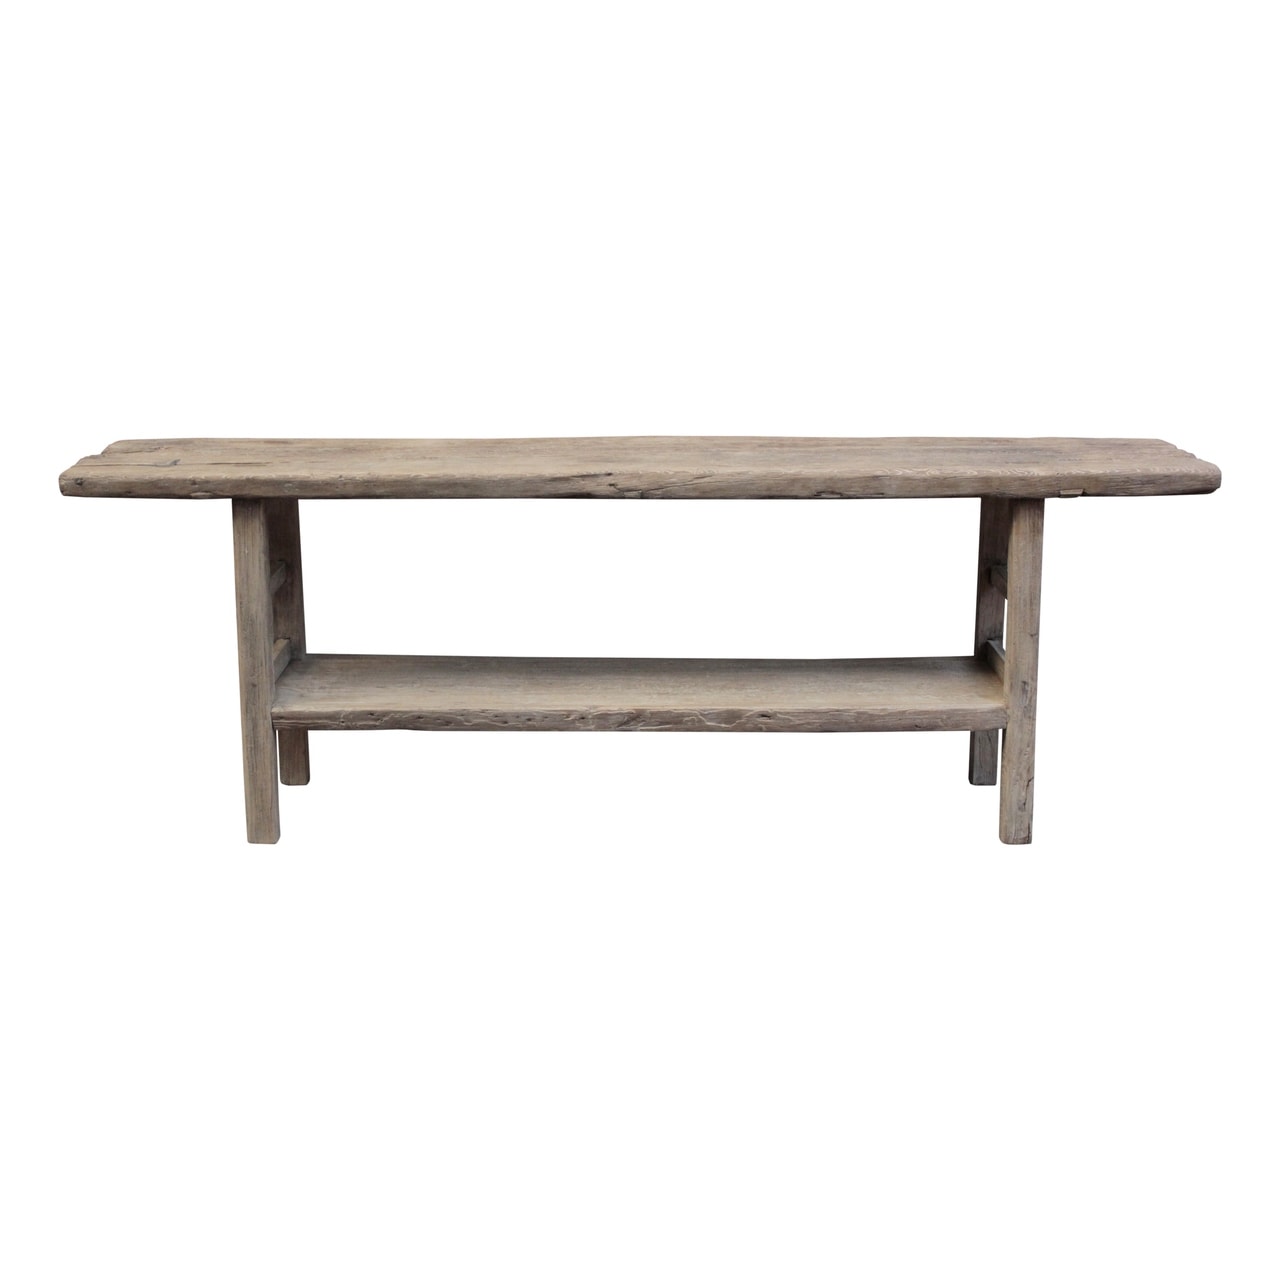 8 foot long console table